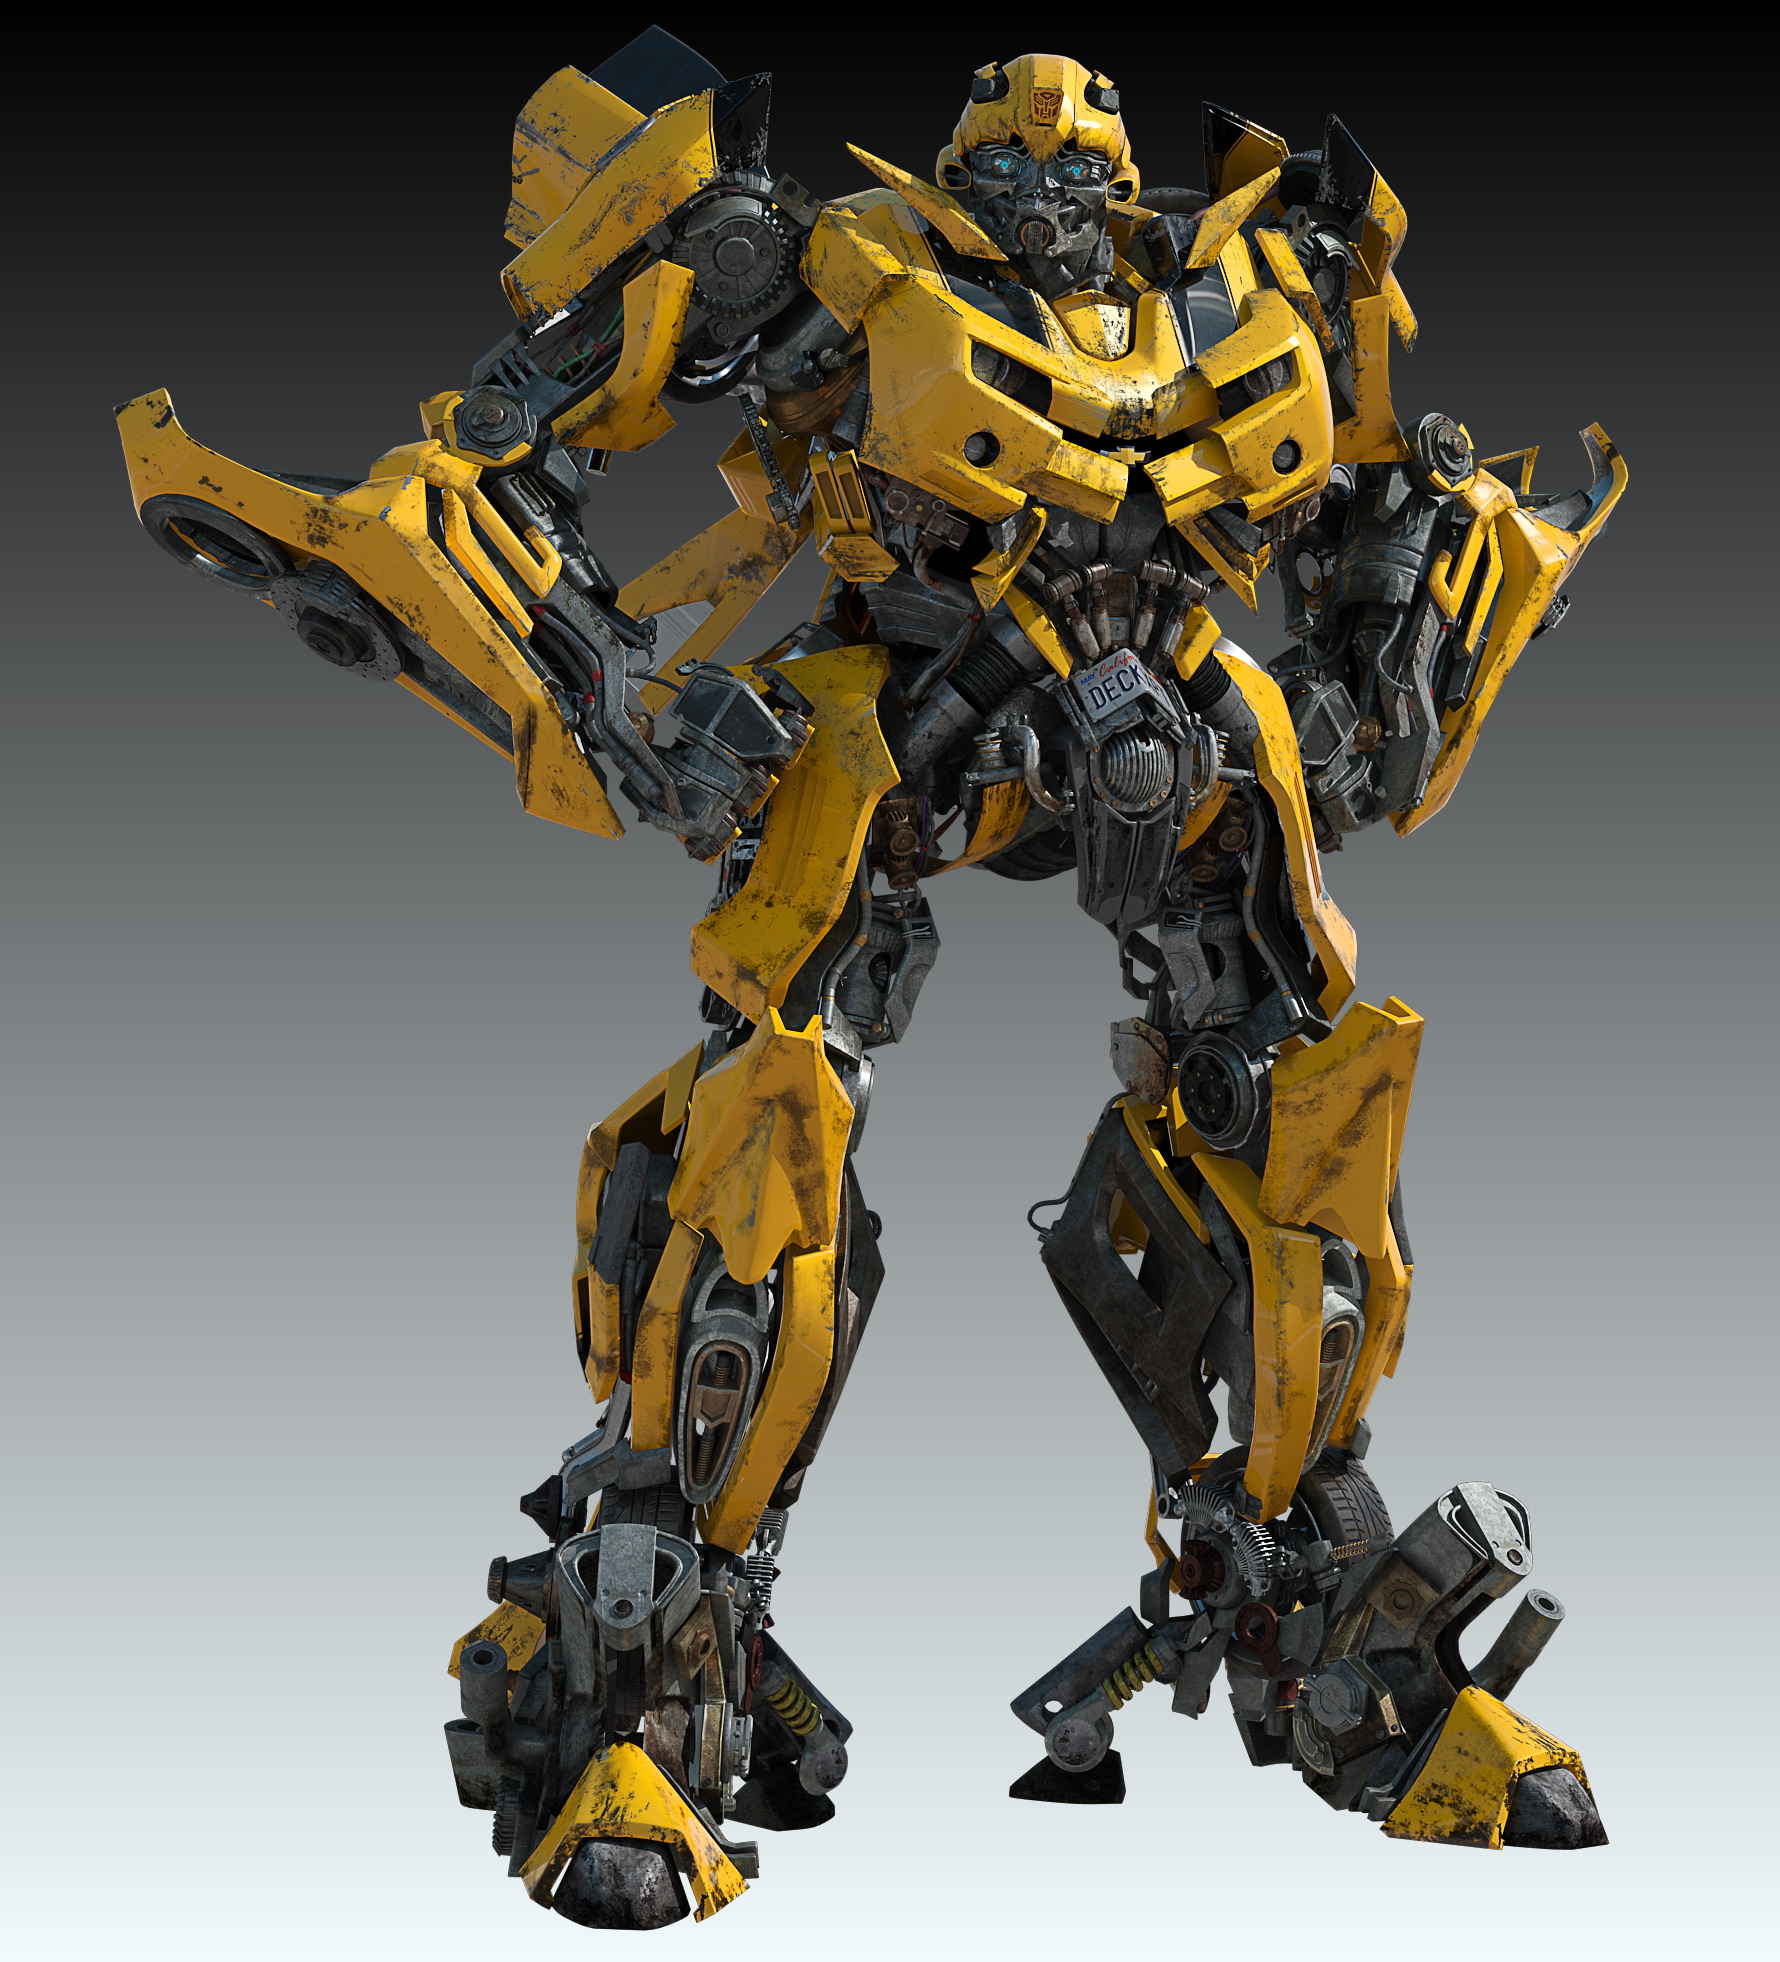 Bumblebee Transformers Live Action Film Series Wiki FANDOM Powered By Wikia